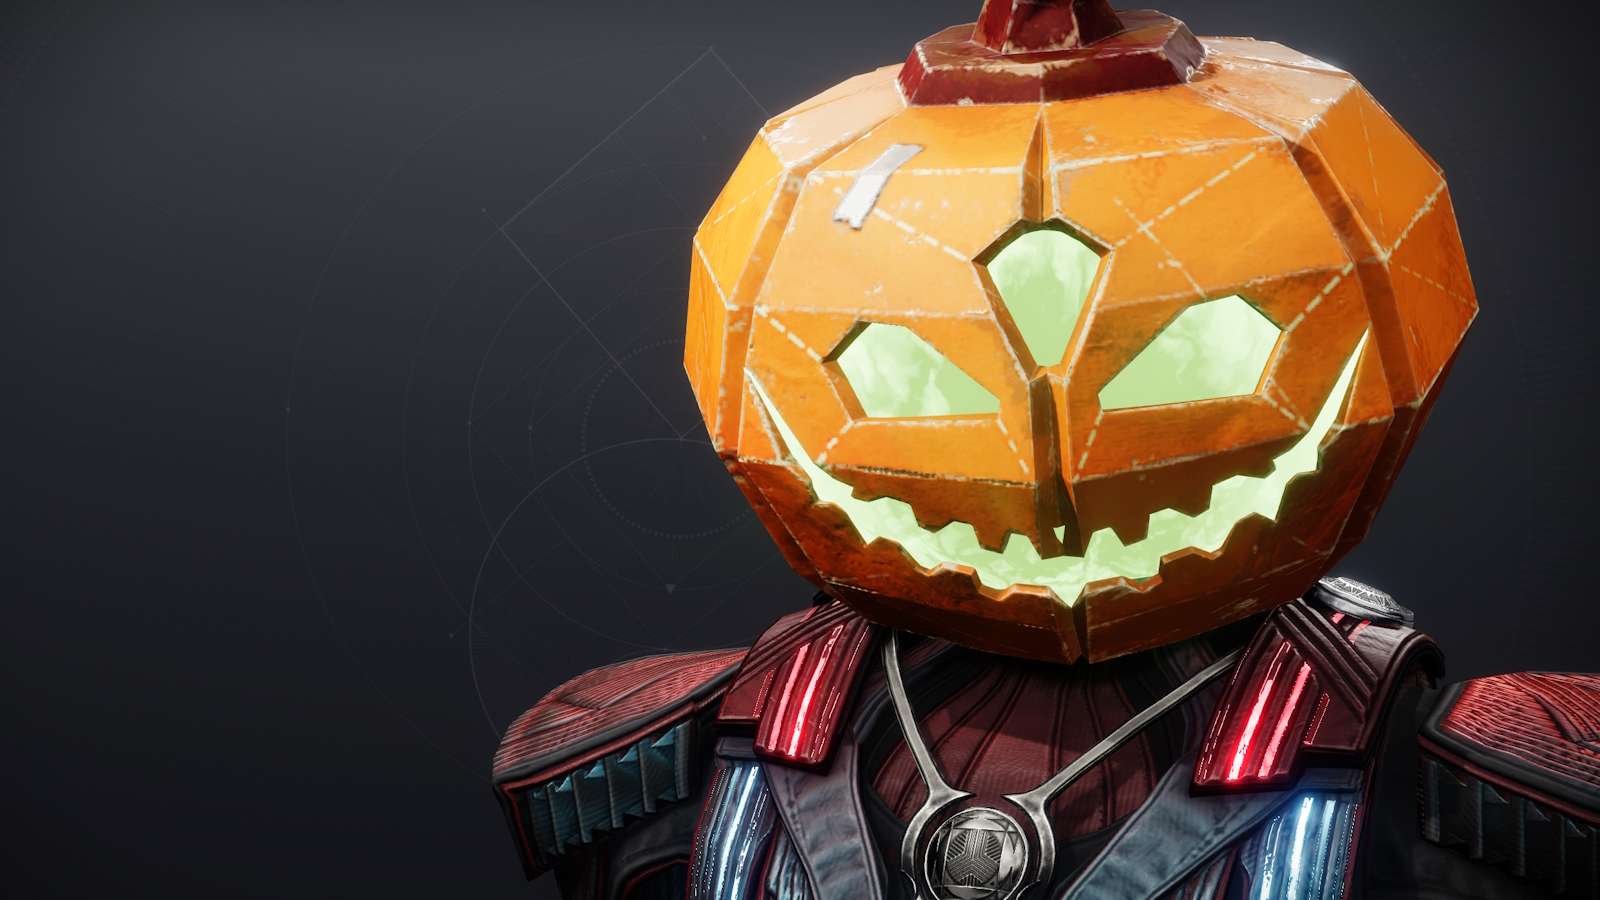 Jack-O'-Lantern mask ornament from Festival of the Lost in Destiny 2.